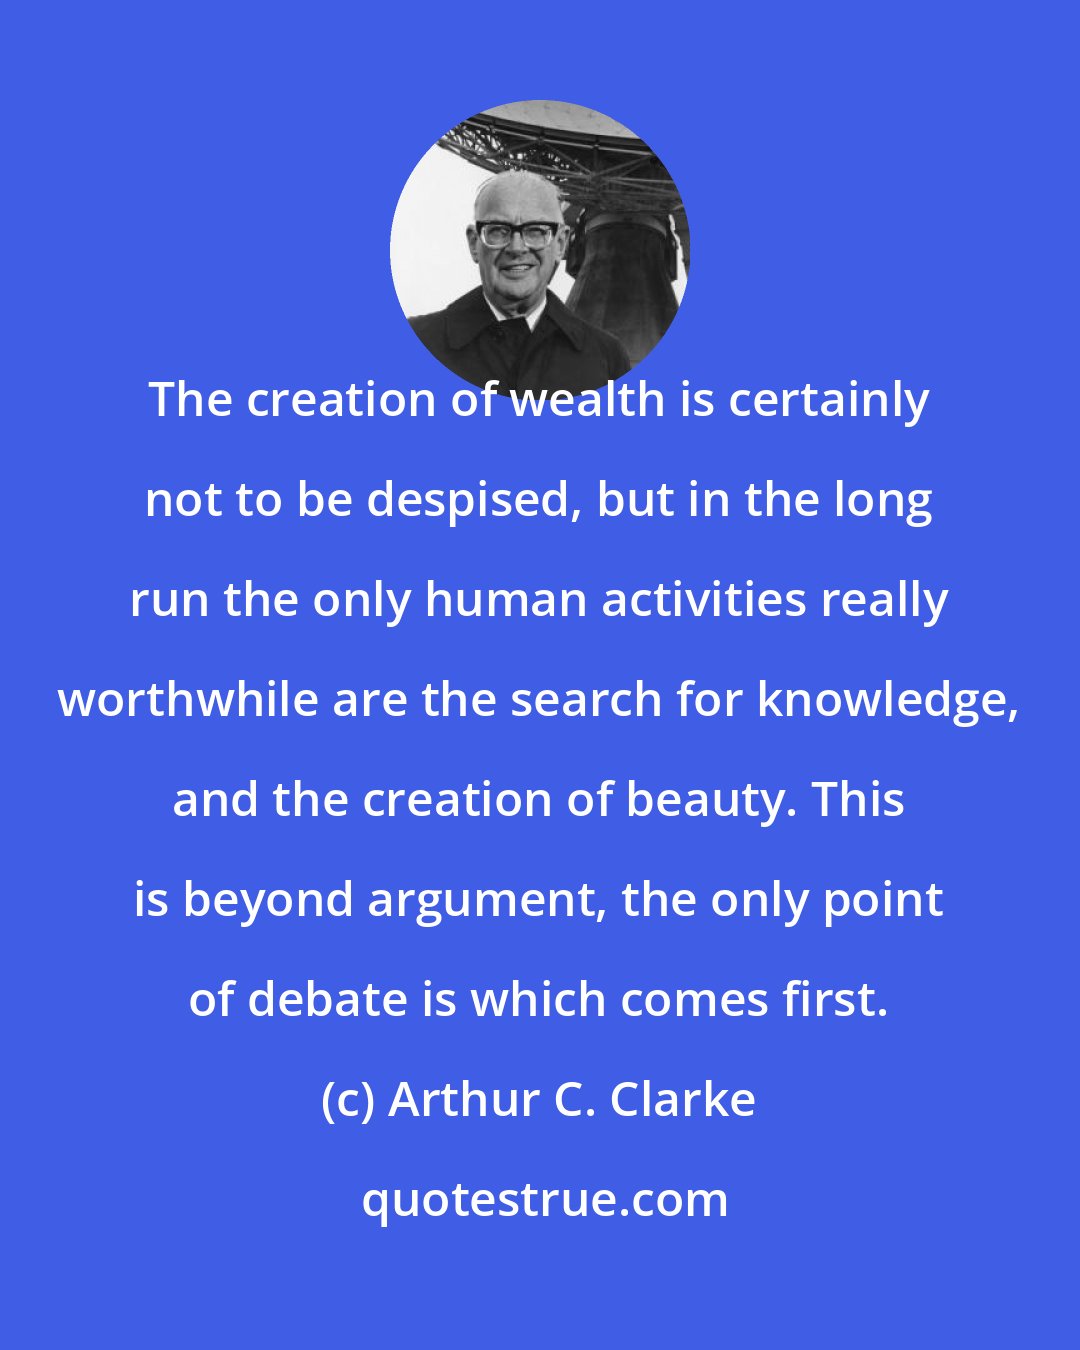 Arthur C. Clarke: The creation of wealth is certainly not to be despised, but in the long run the only human activities really worthwhile are the search for knowledge, and the creation of beauty. This is beyond argument, the only point of debate is which comes first.